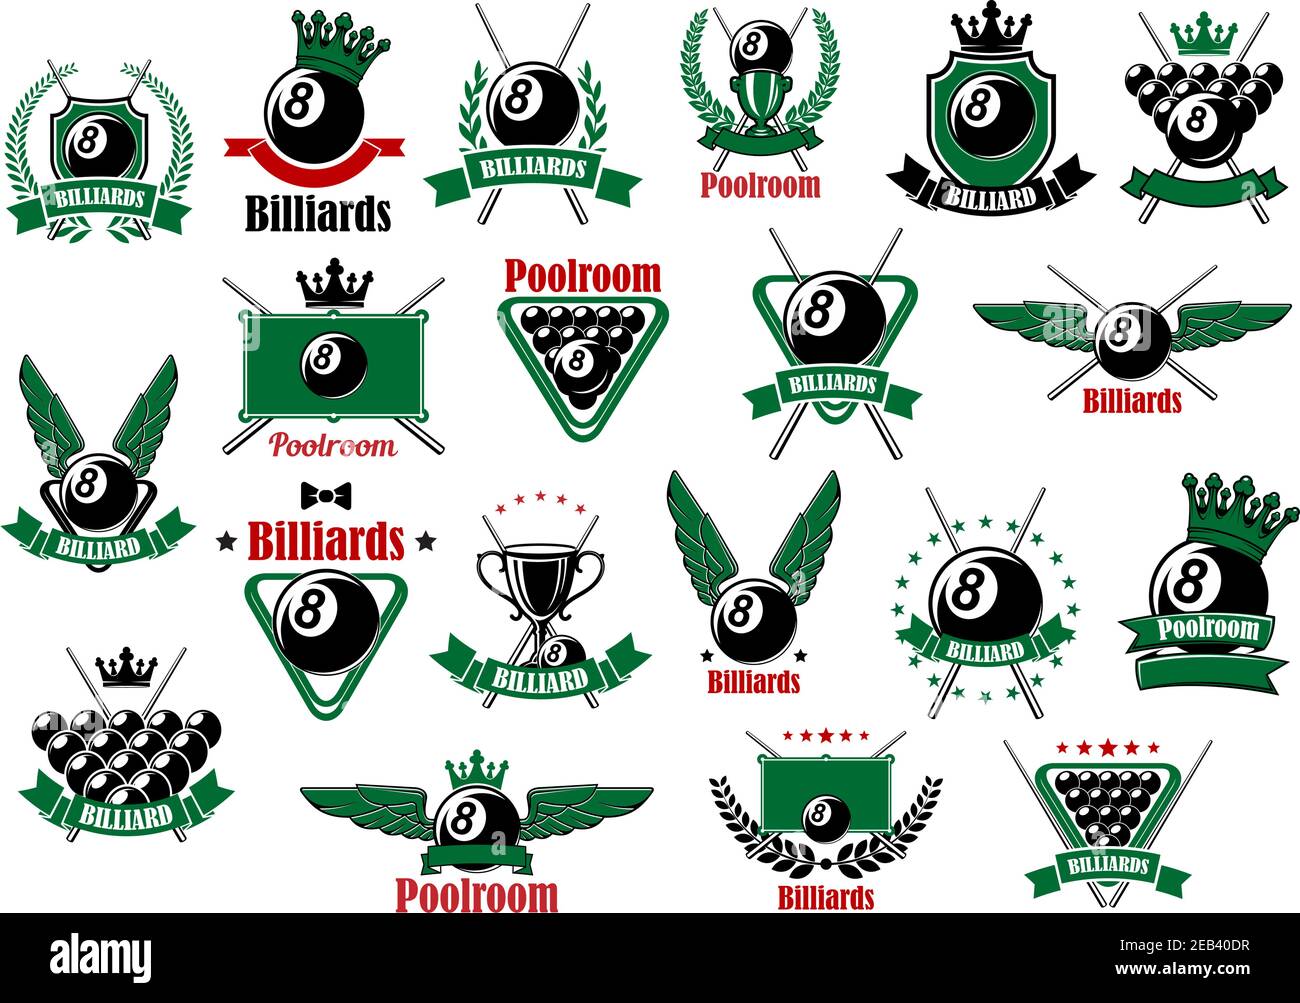 Billiards, pool and snooker sport icons for poolroom or competition emblems design with balls, cues, tables, winged and crowned lucky black balls, tro Stock Vector